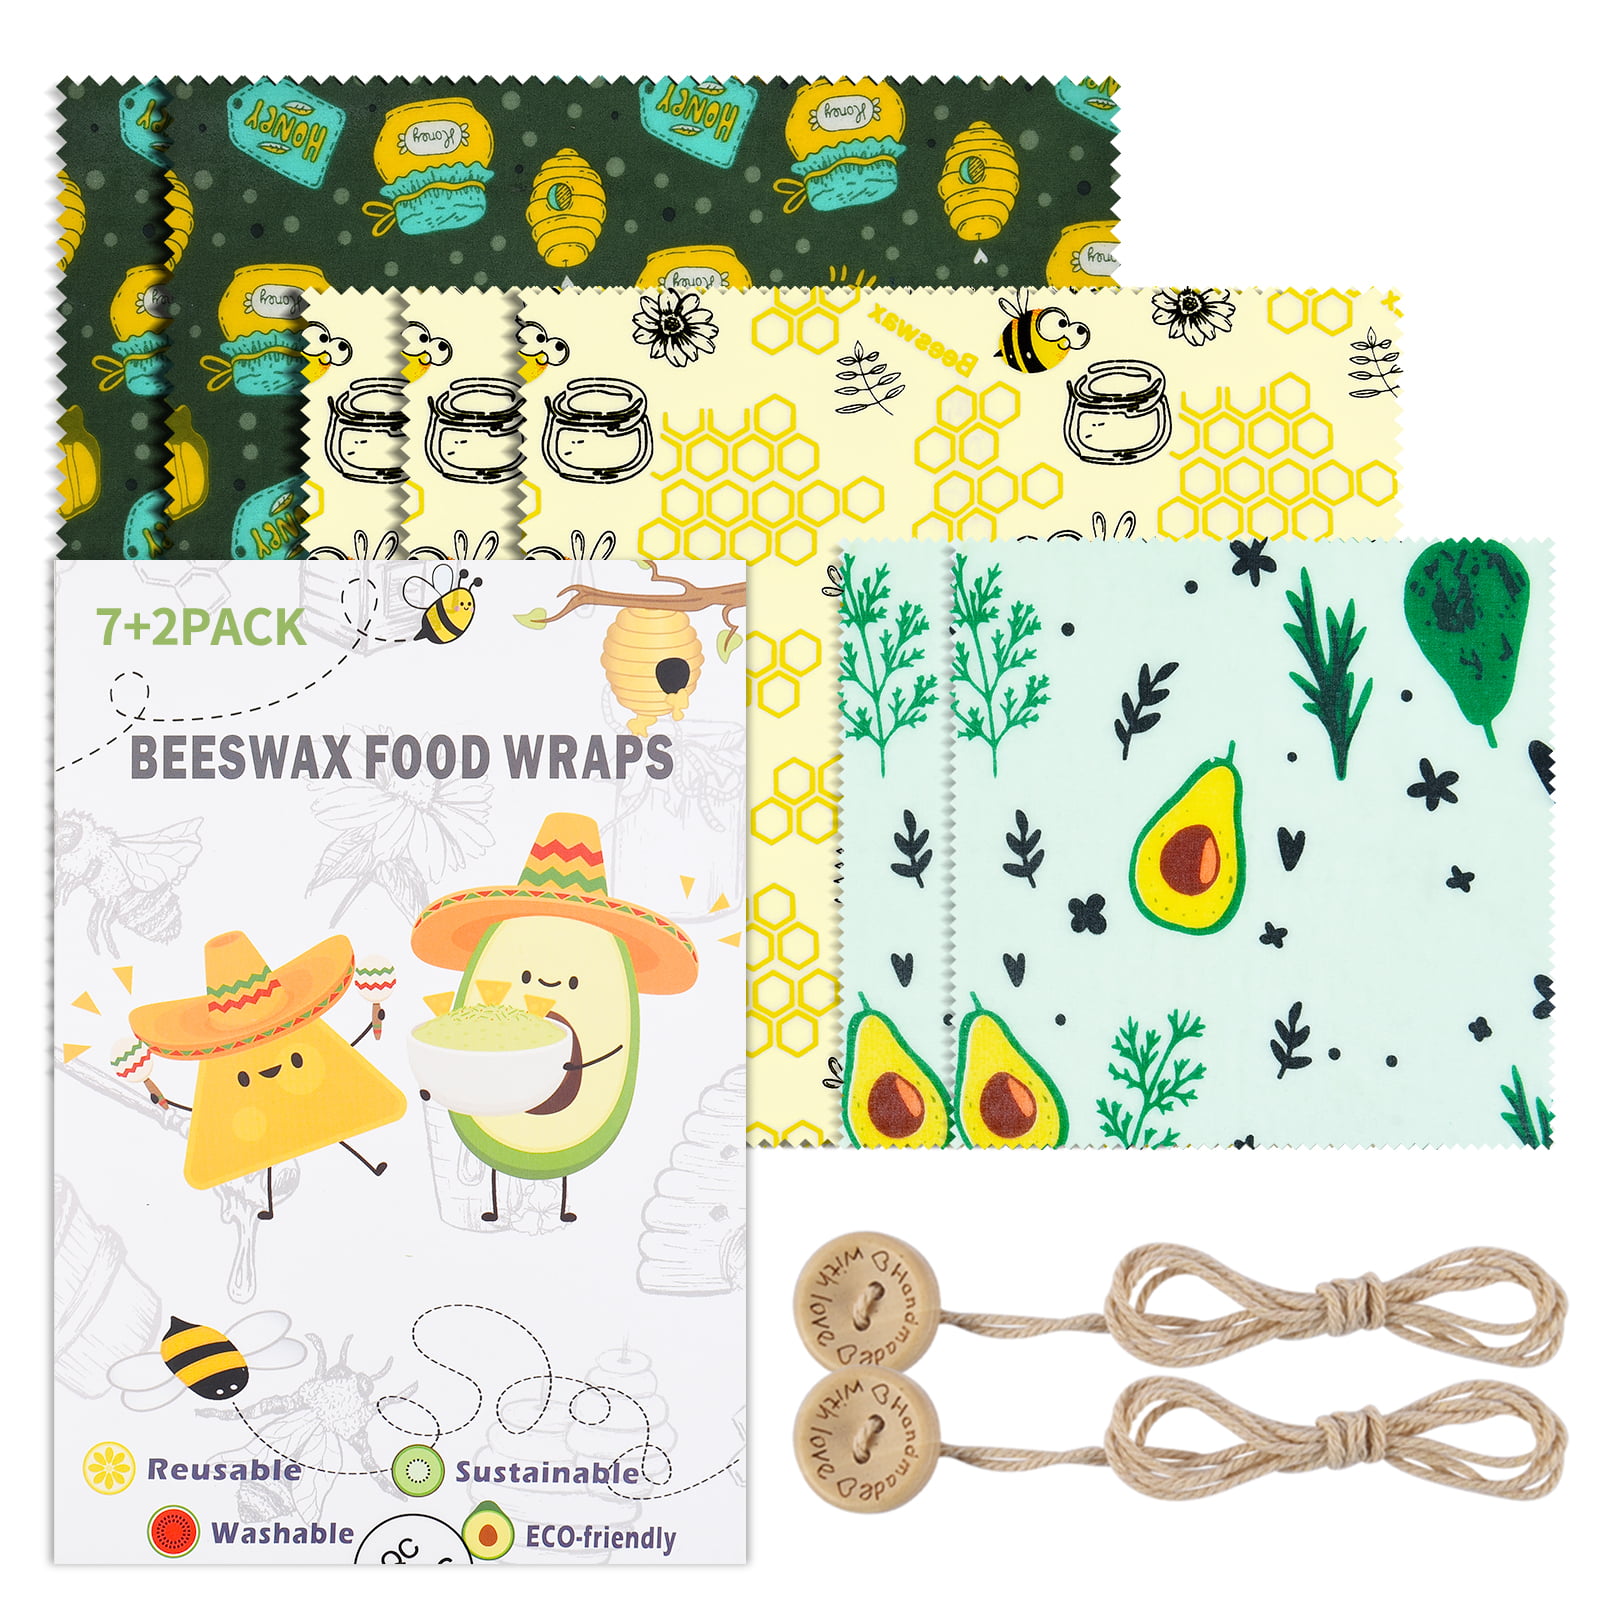 UARTER Beeswax Wraps Eco Friendly Washable Reusable Beeswax Food Wraps 8 Pack 